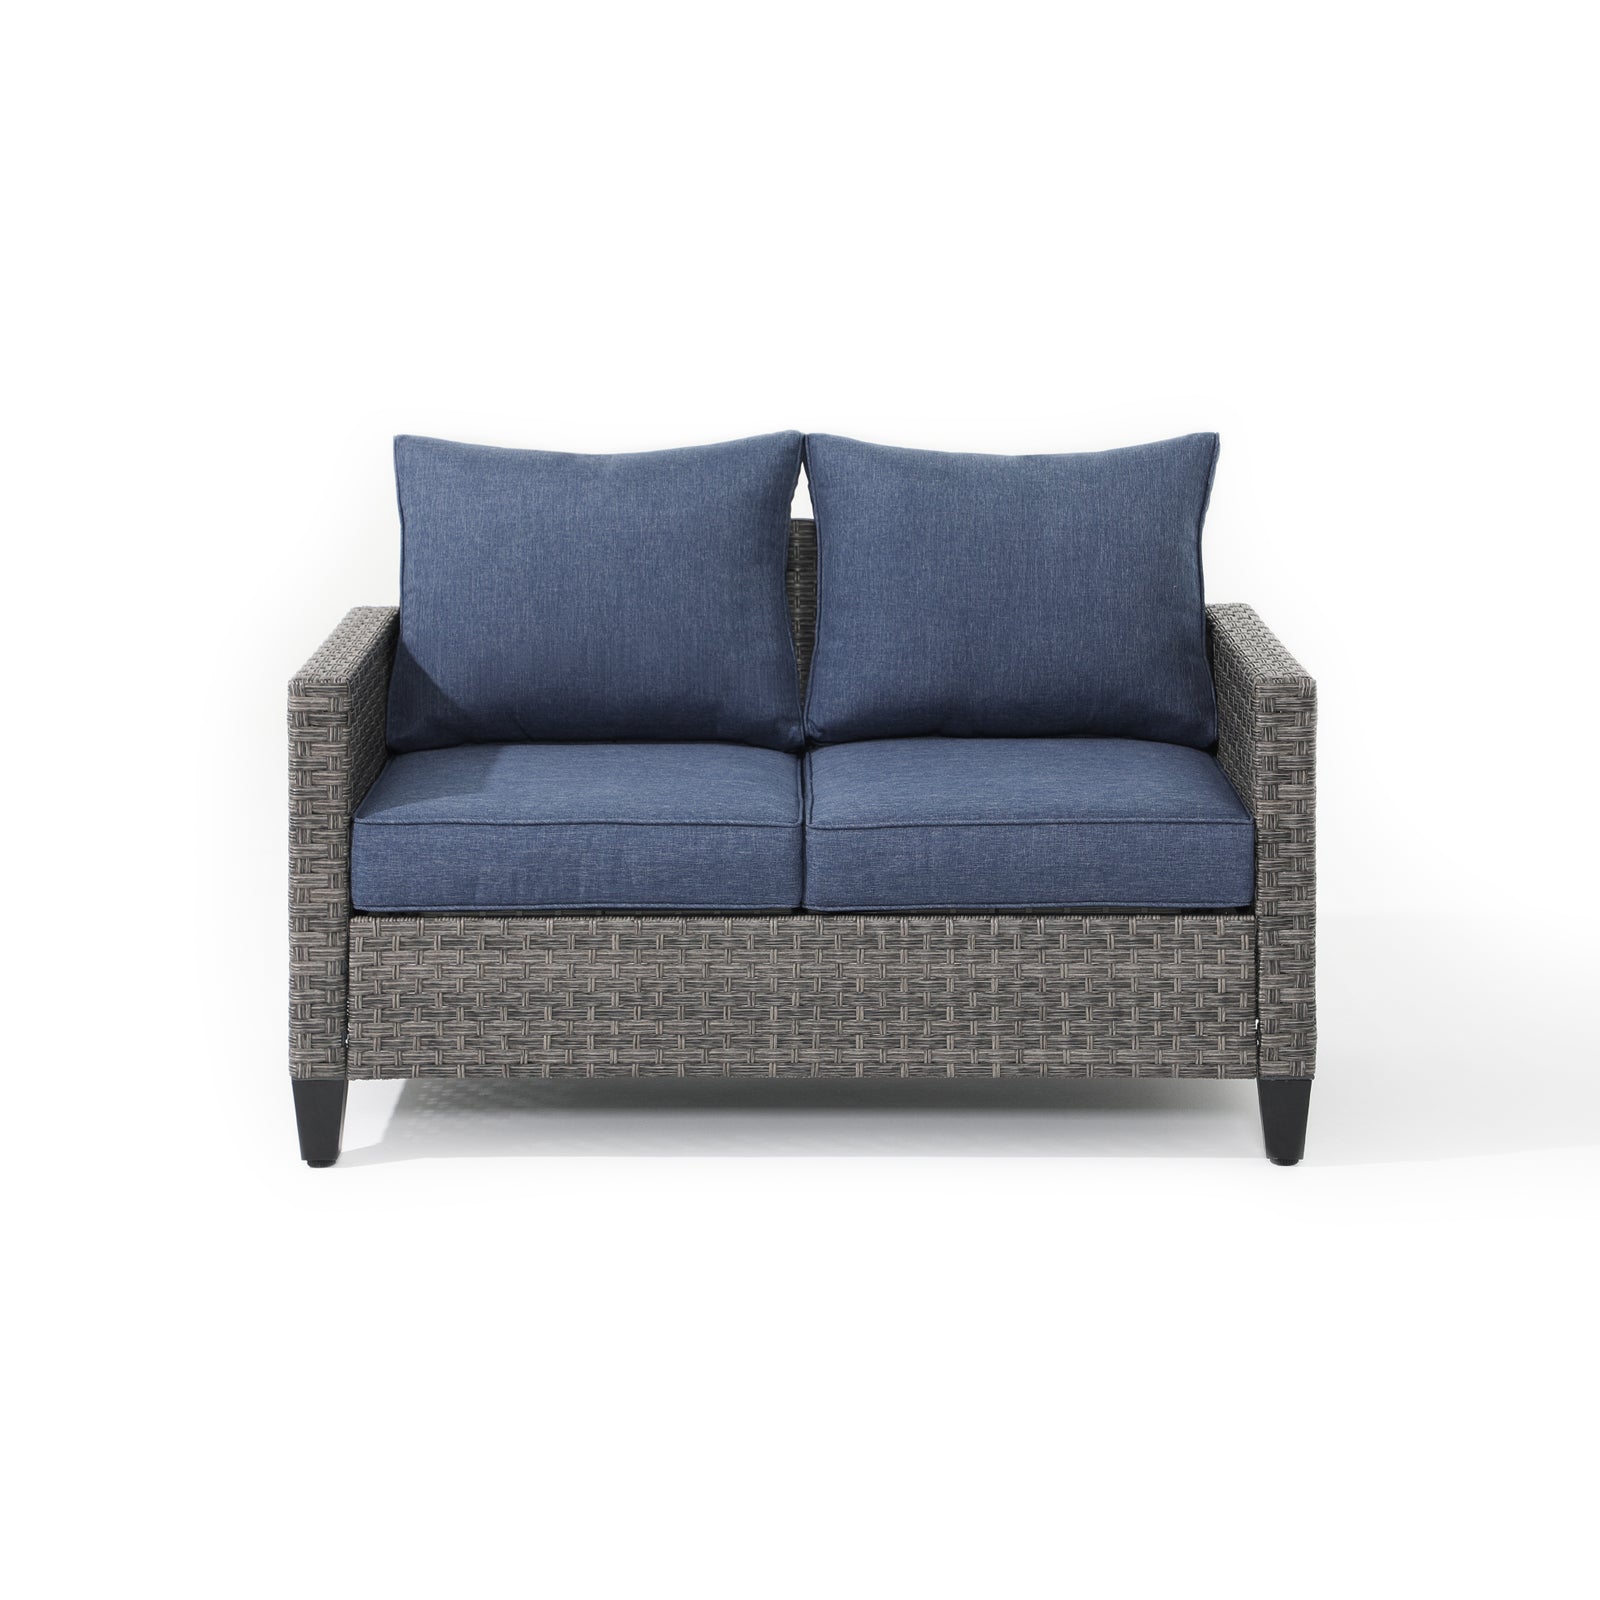 Ayia Modern HDPE Wicker Outdoor Furniture, patio loveseat with grey rattan design, navy blue  cushions, Front angle - Jardina Furniture #color_Navy blue